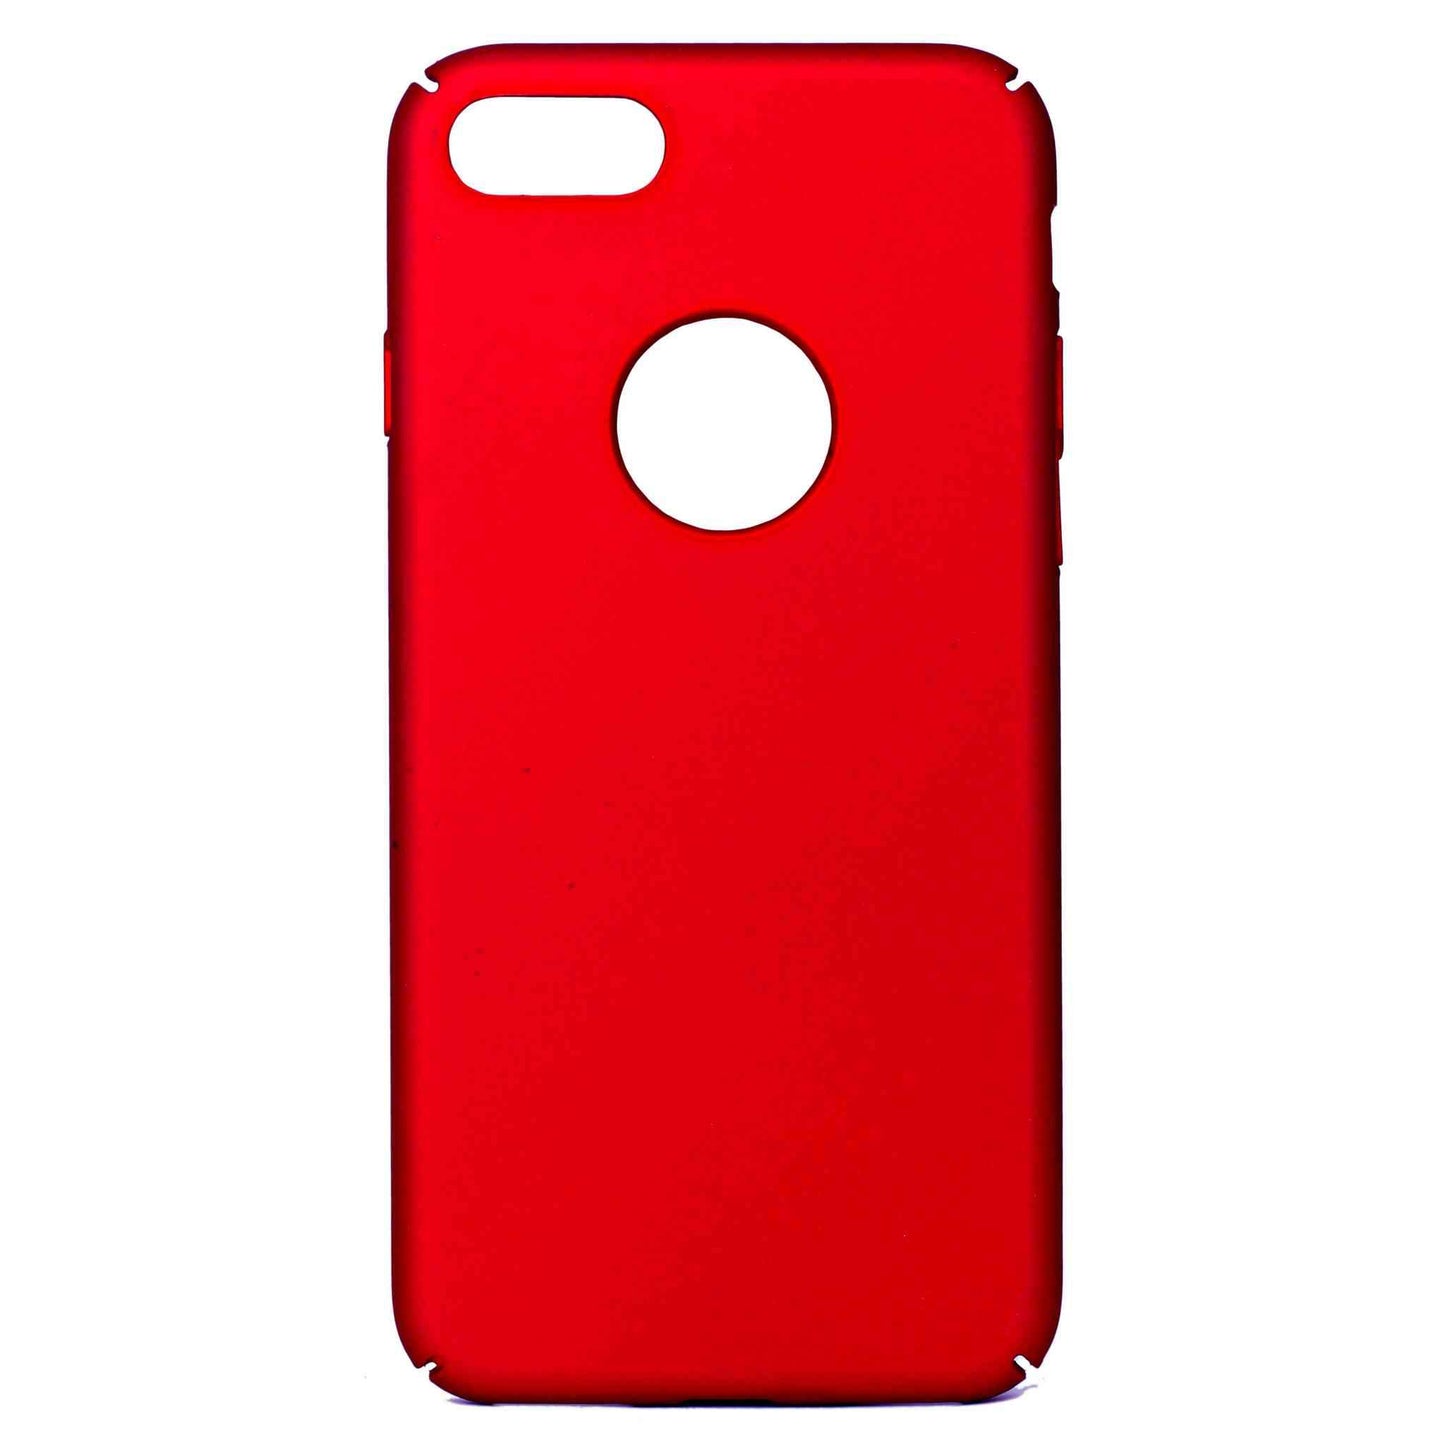 Indian Petals Shock-proof Anti-scratch Hard Protective Mobile Back Case Cover for Apple iPhone 7, Hot Red - Indian Petals